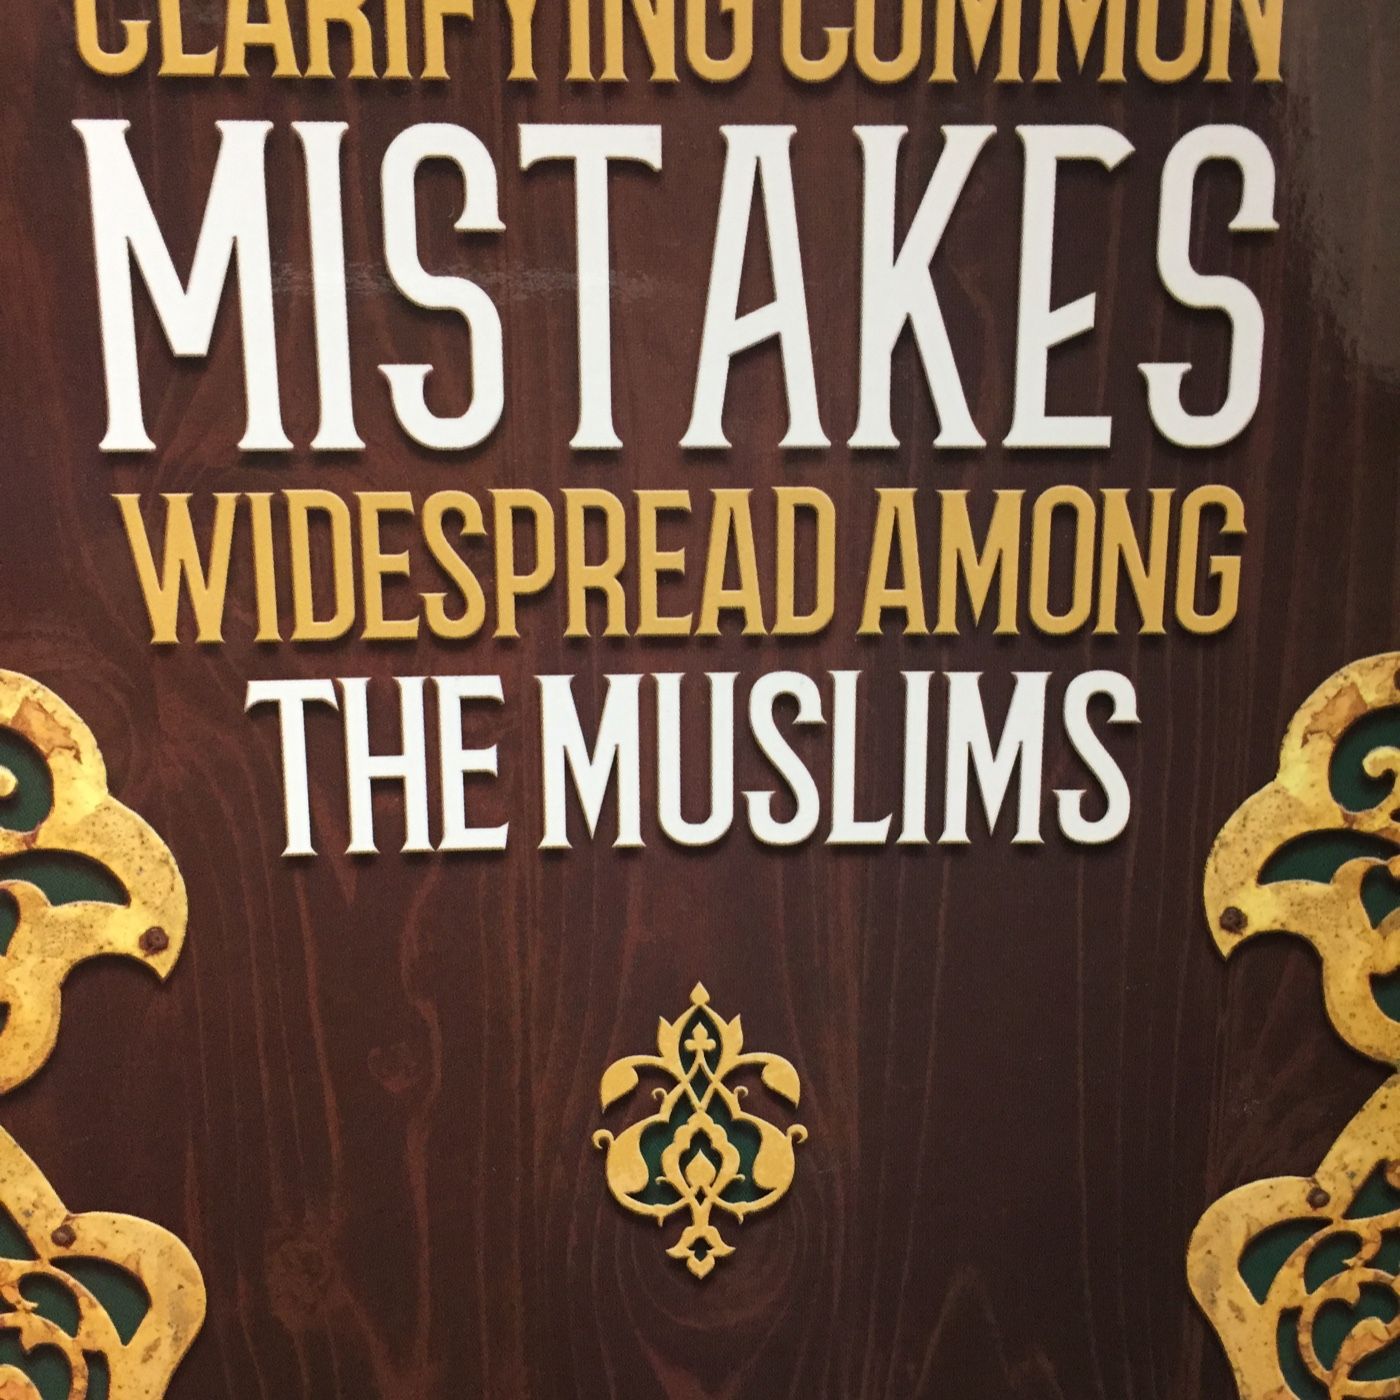 Clarifying Common Mistakes Widespread